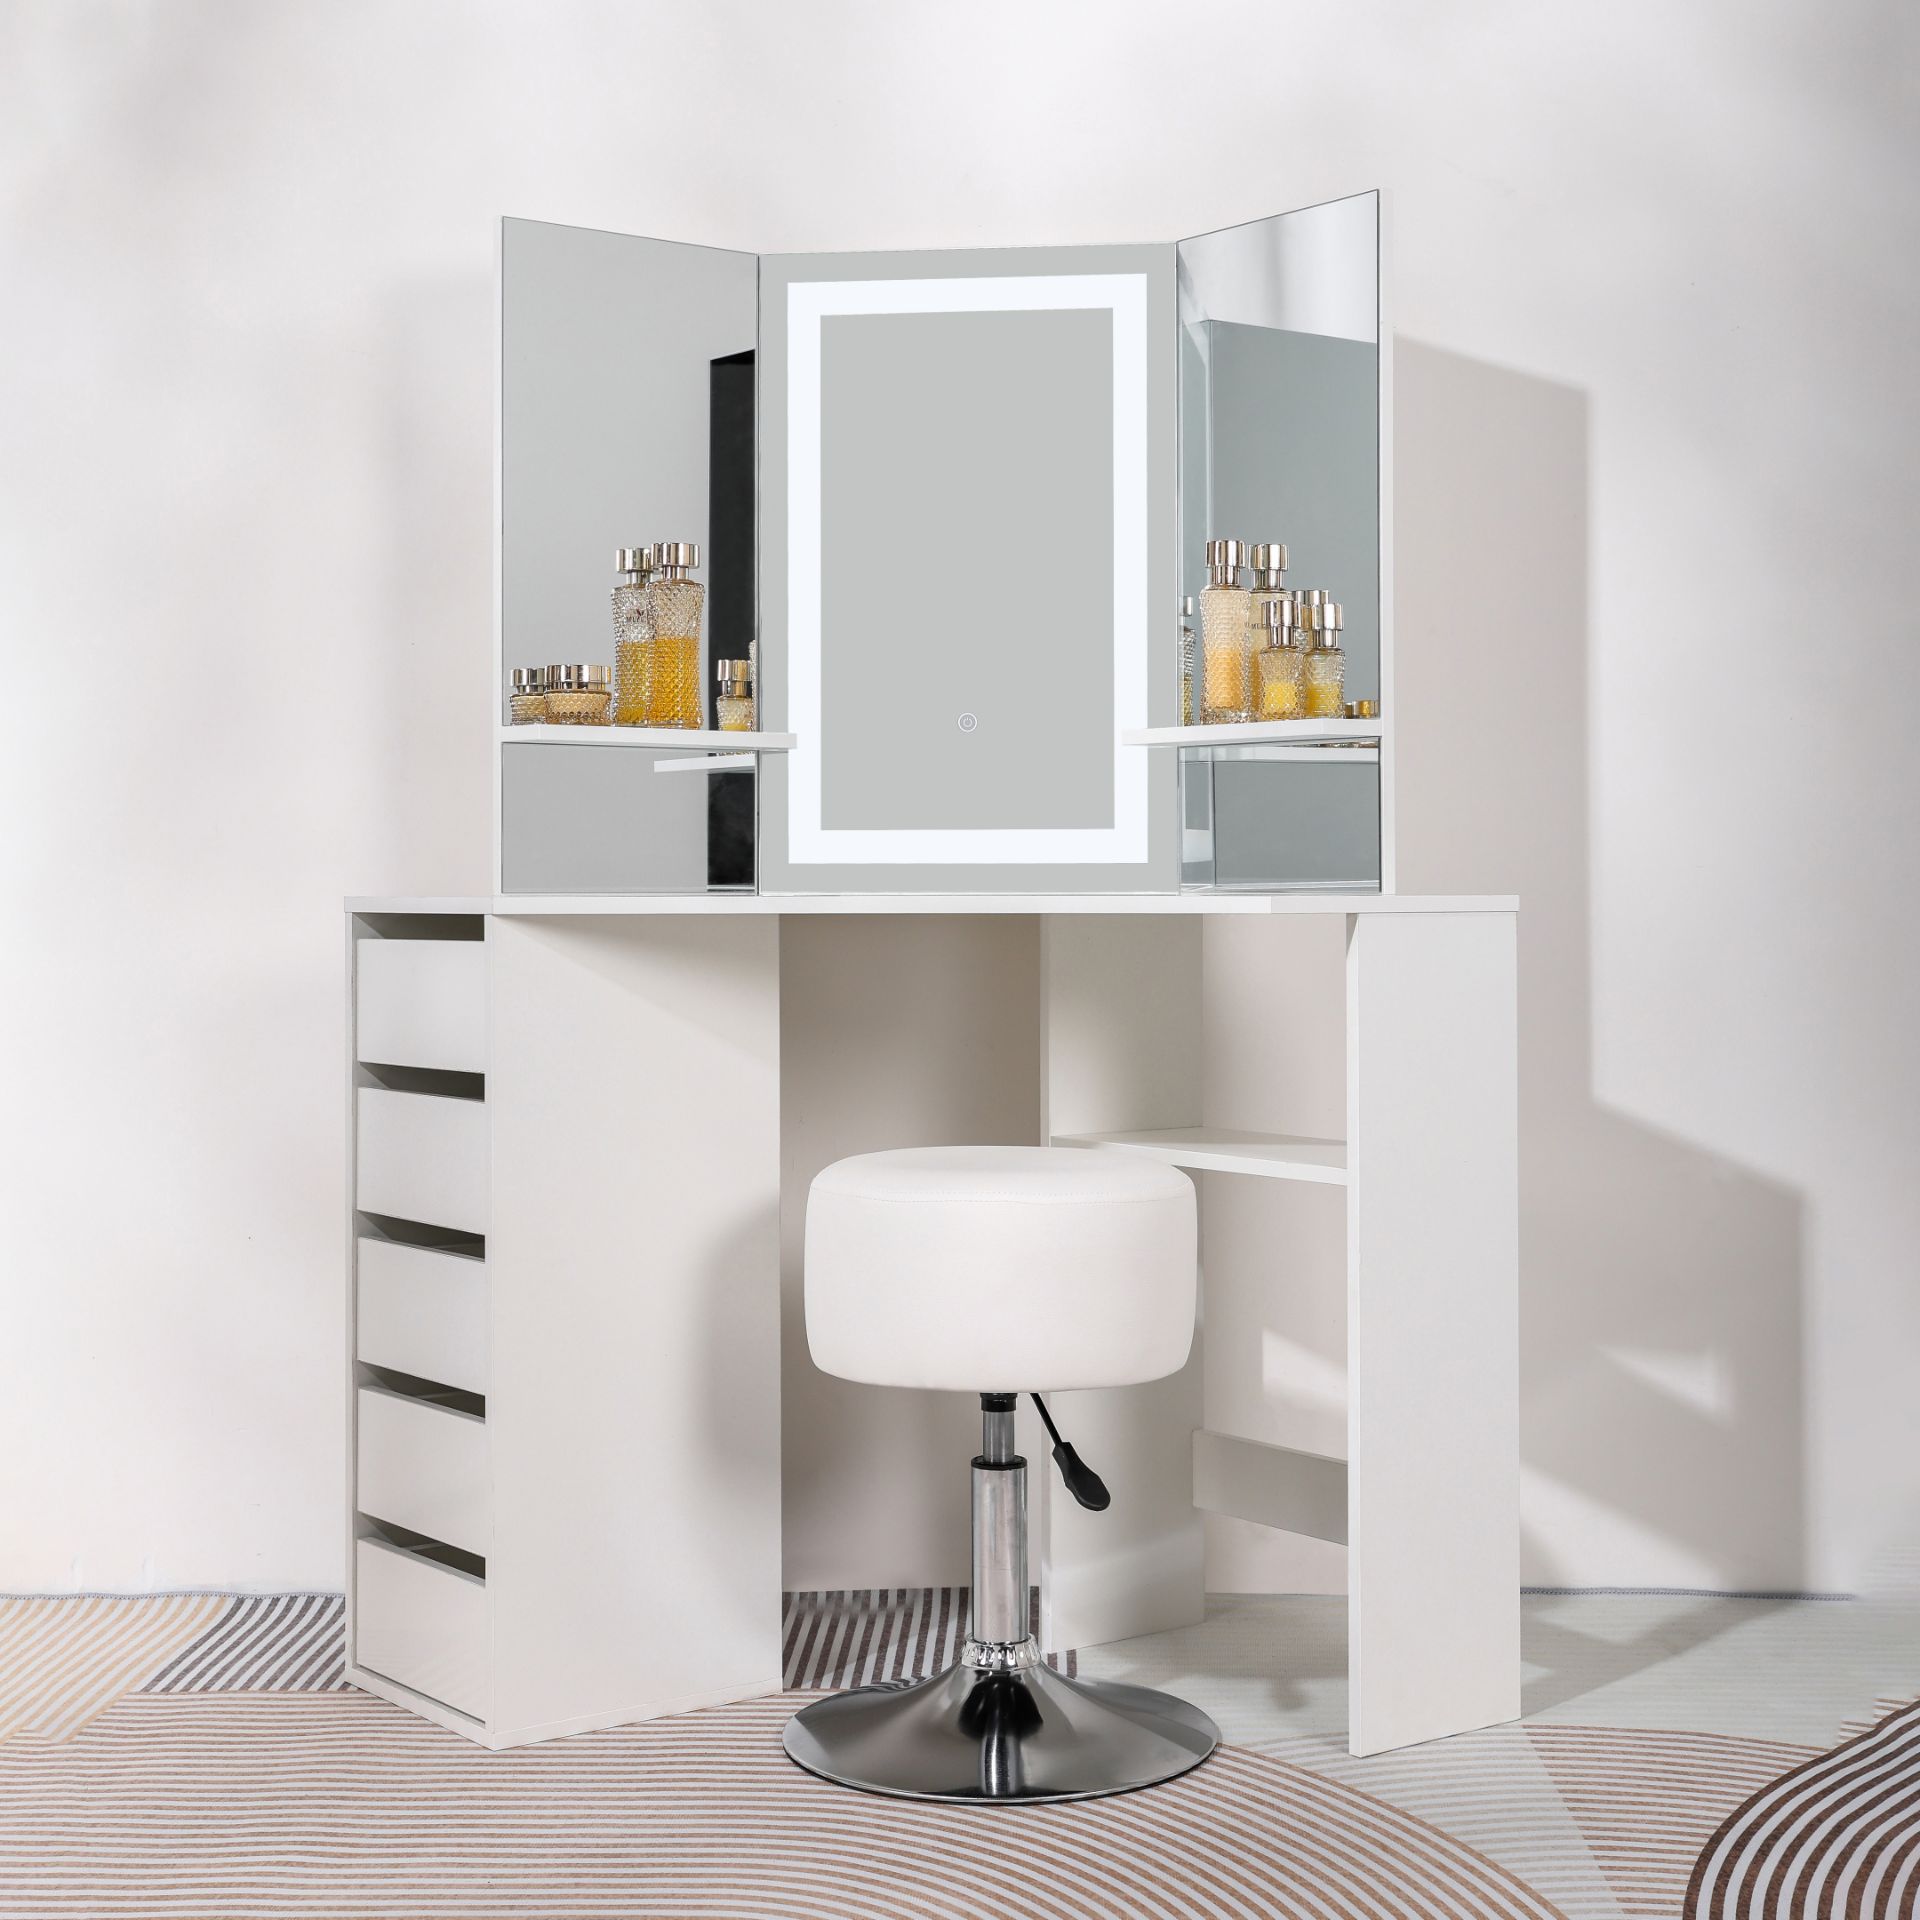 10 X BRAND NEW MAKE UP CORNER DRESSING TABLE 5 DRAWER WITH TOUCH LED MIRROR & STOOL RRP £3500 - Image 3 of 4